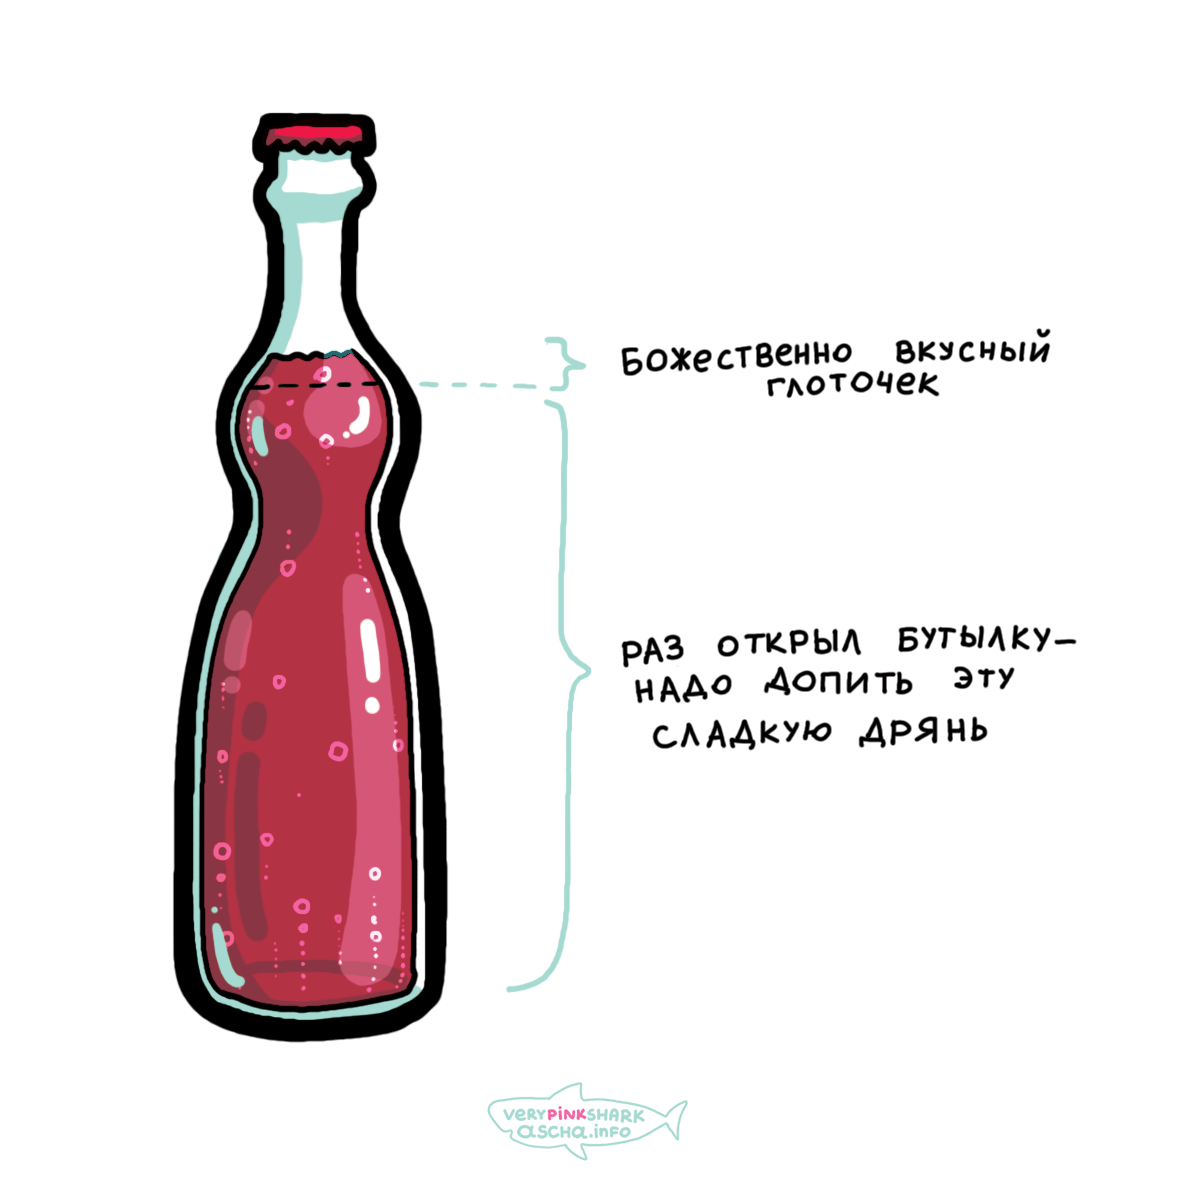 About any soda - My, Coca-Cola, Pepsi, Fanta, Soda, Picture with text, Observation